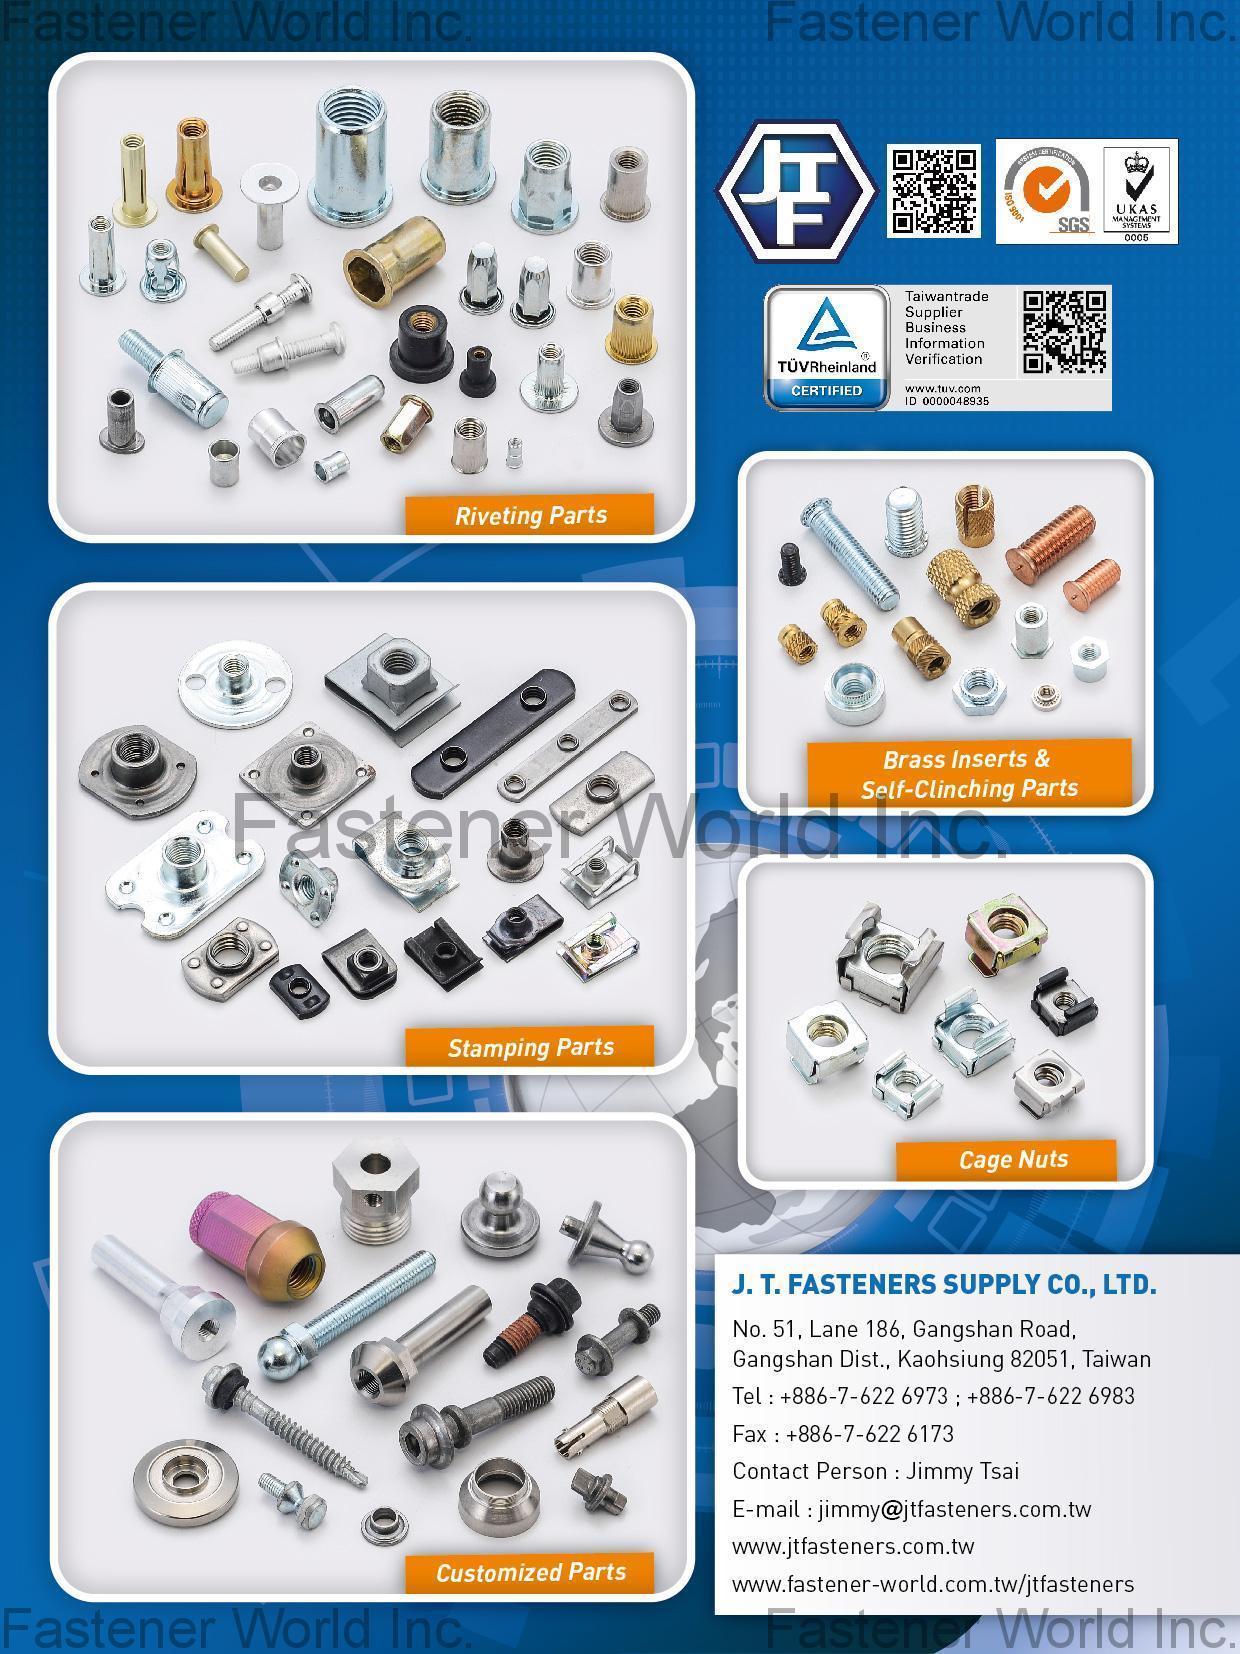 J. T. FASTENERS SUPPLY CO., LTD.  , Riveting Parts, Stamping Parts, Customized Parts, Brass Inserts & Self-Clinching Parts, Cage Nuts , Special Parts